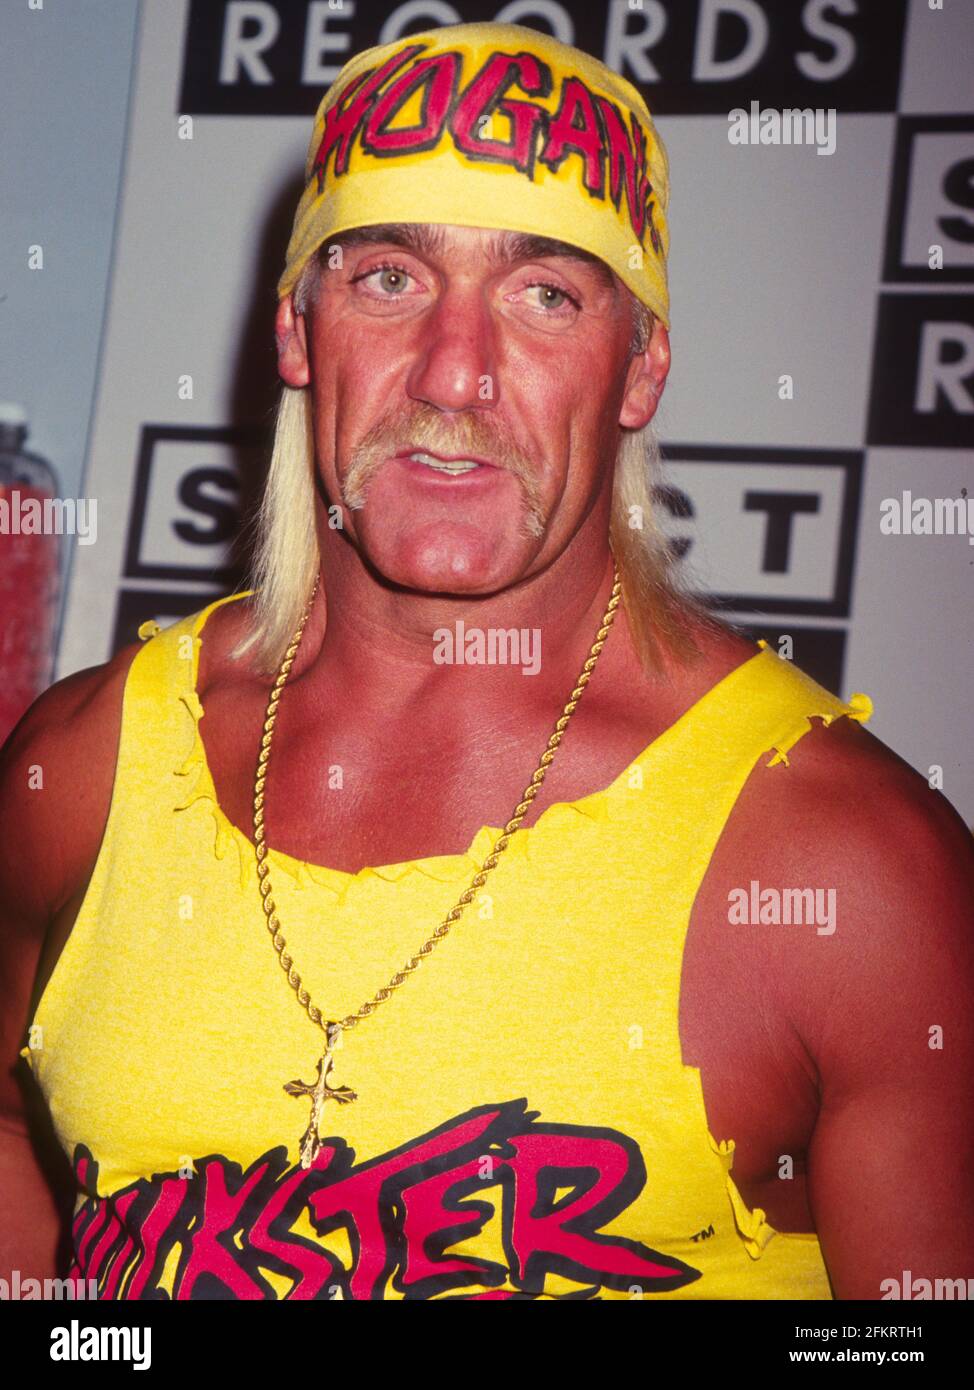 Hulk Hogan Actor High Resolution Stock Photography and Images - Alamy